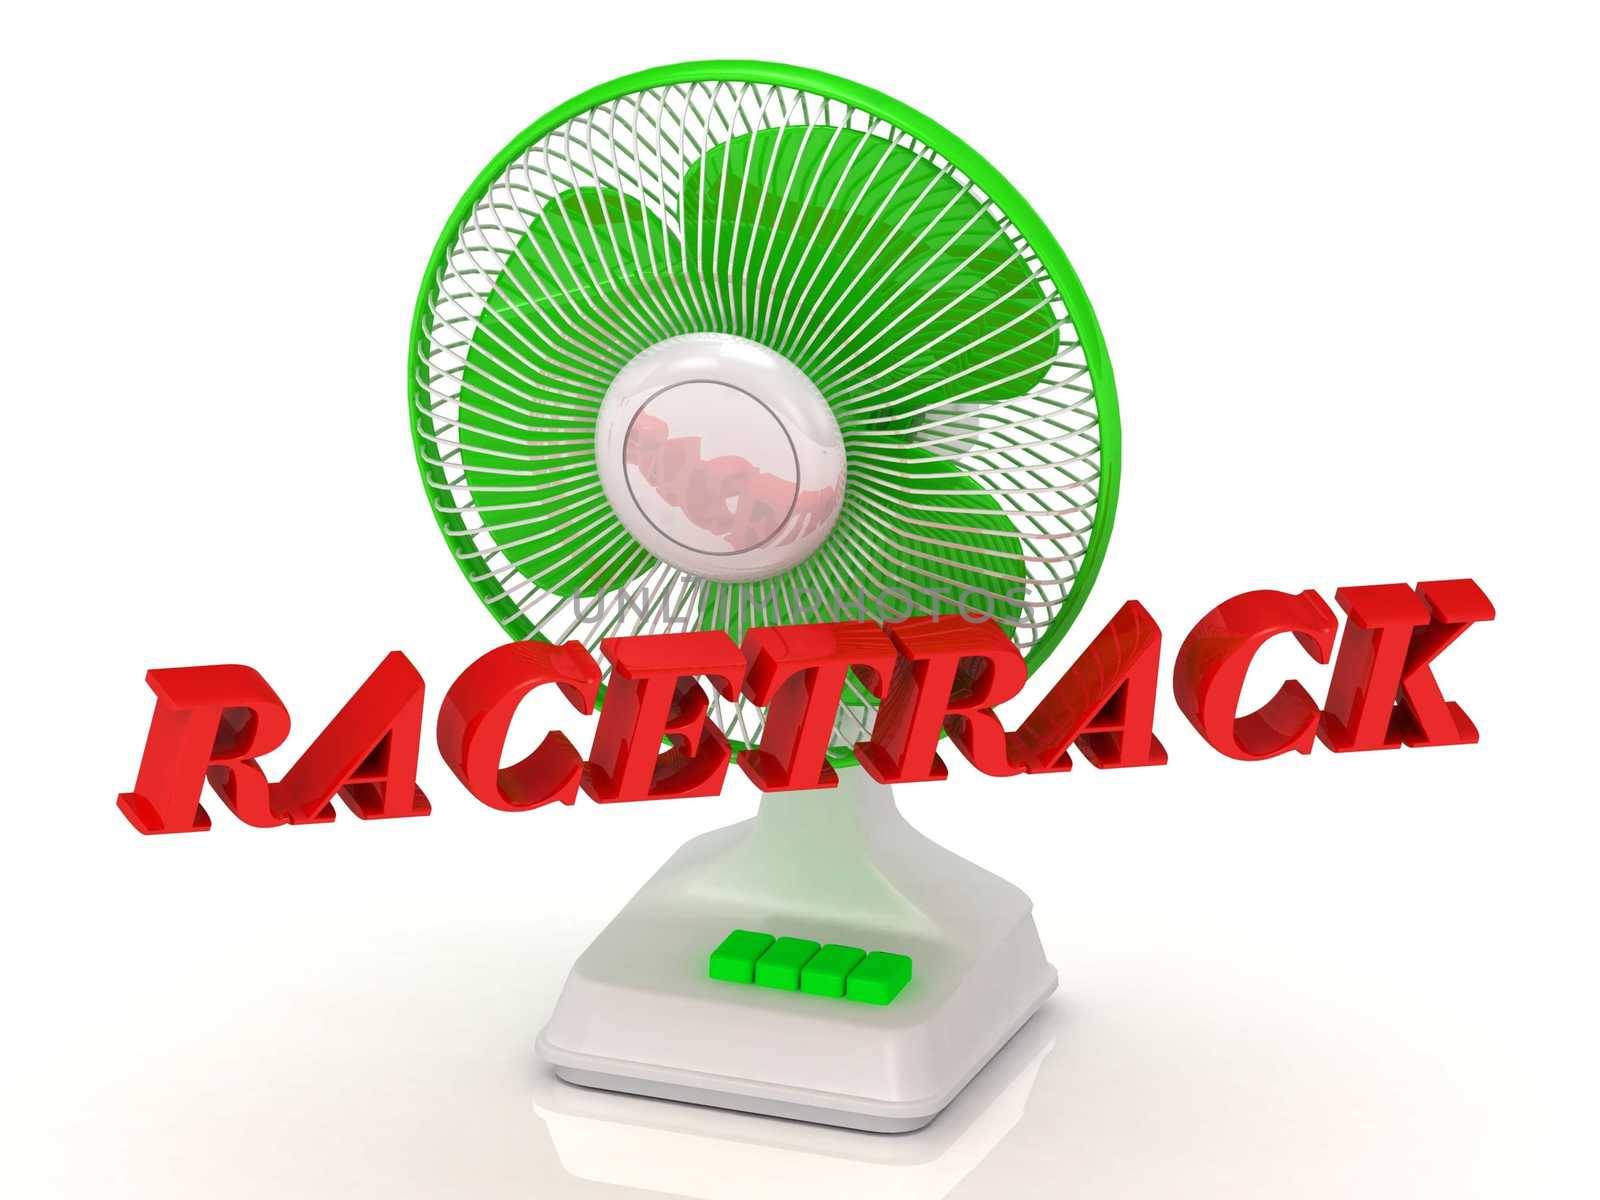 RACETRACK- Green Fan propeller and bright color letters by GreenMost